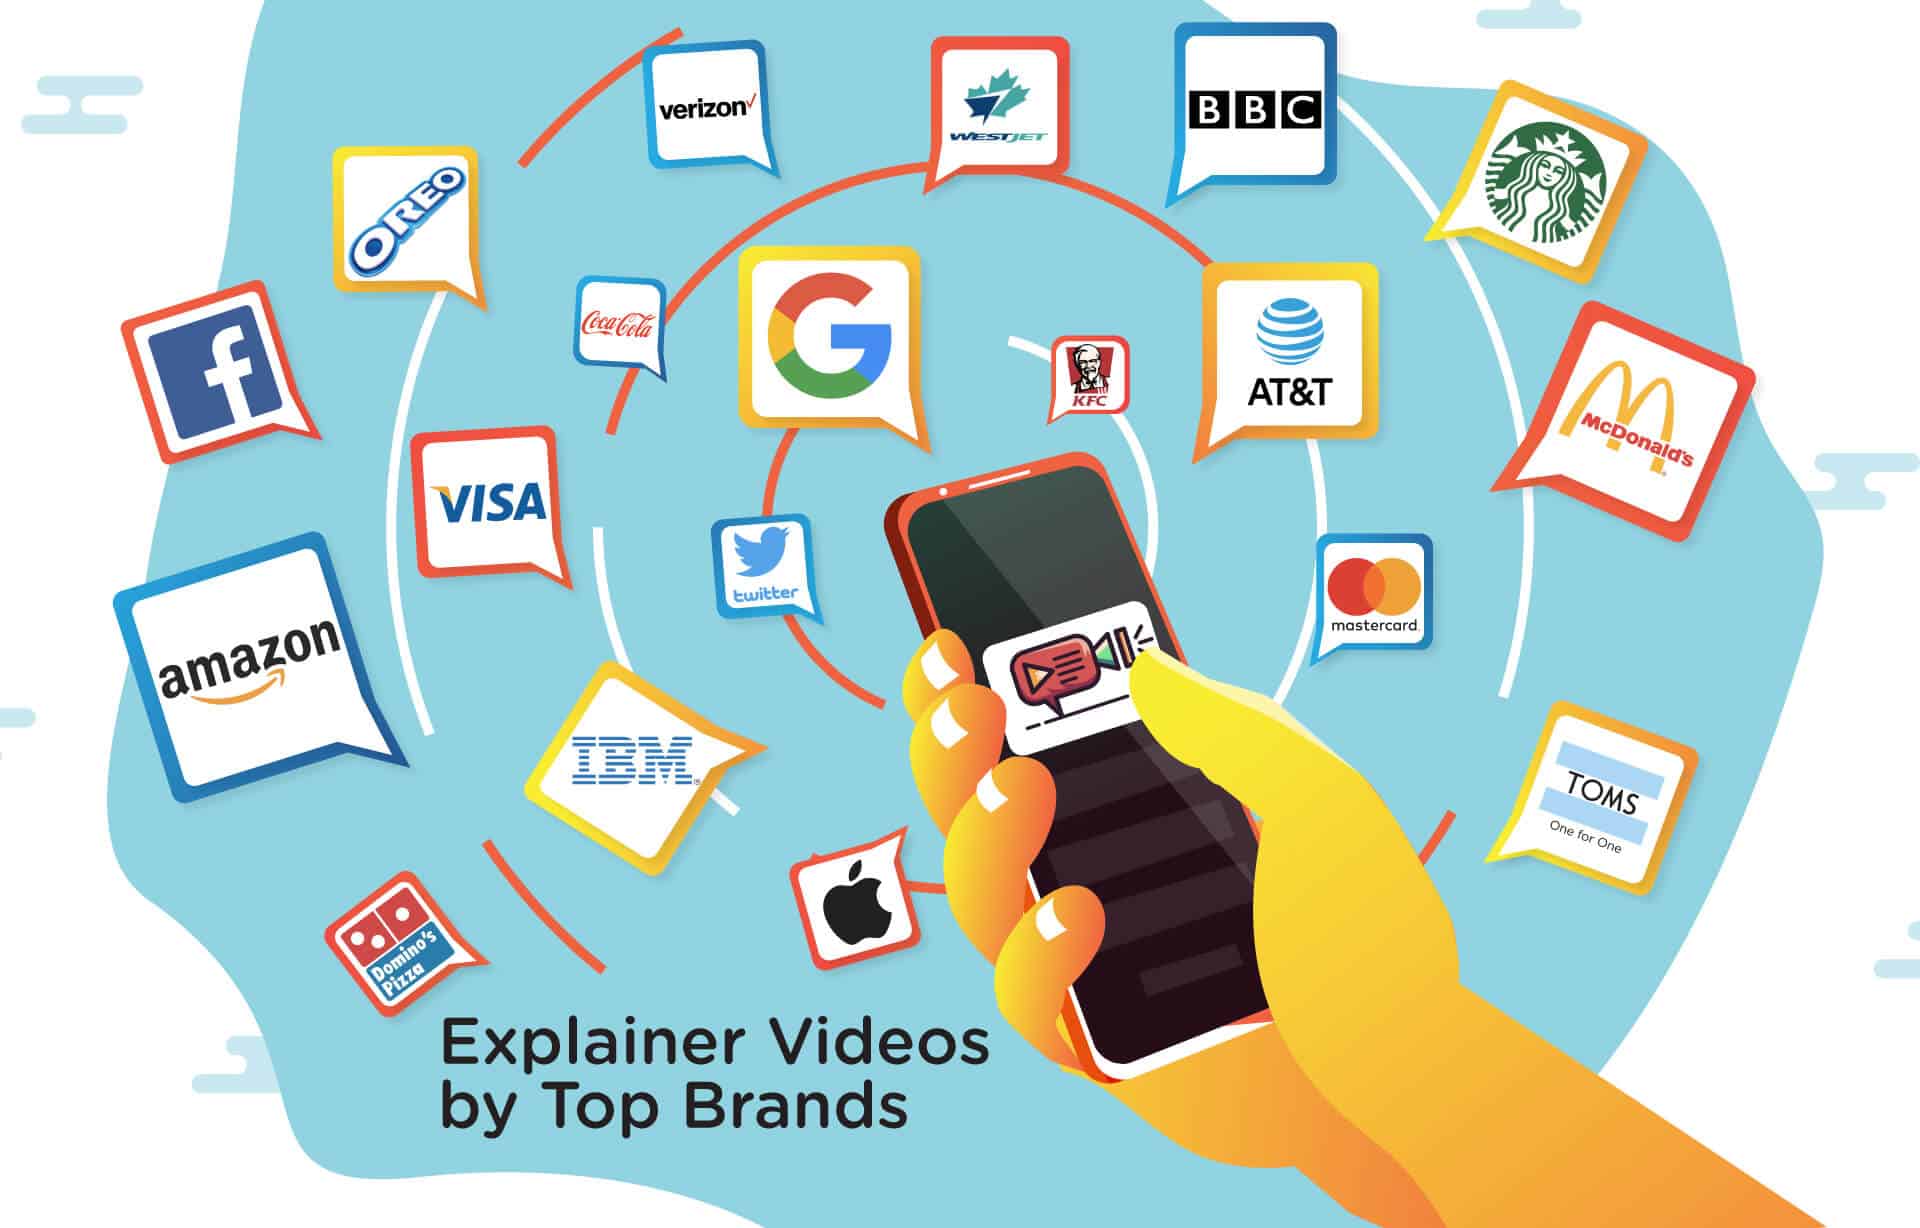 20 Explainer Video Examples from Top Brands 2019